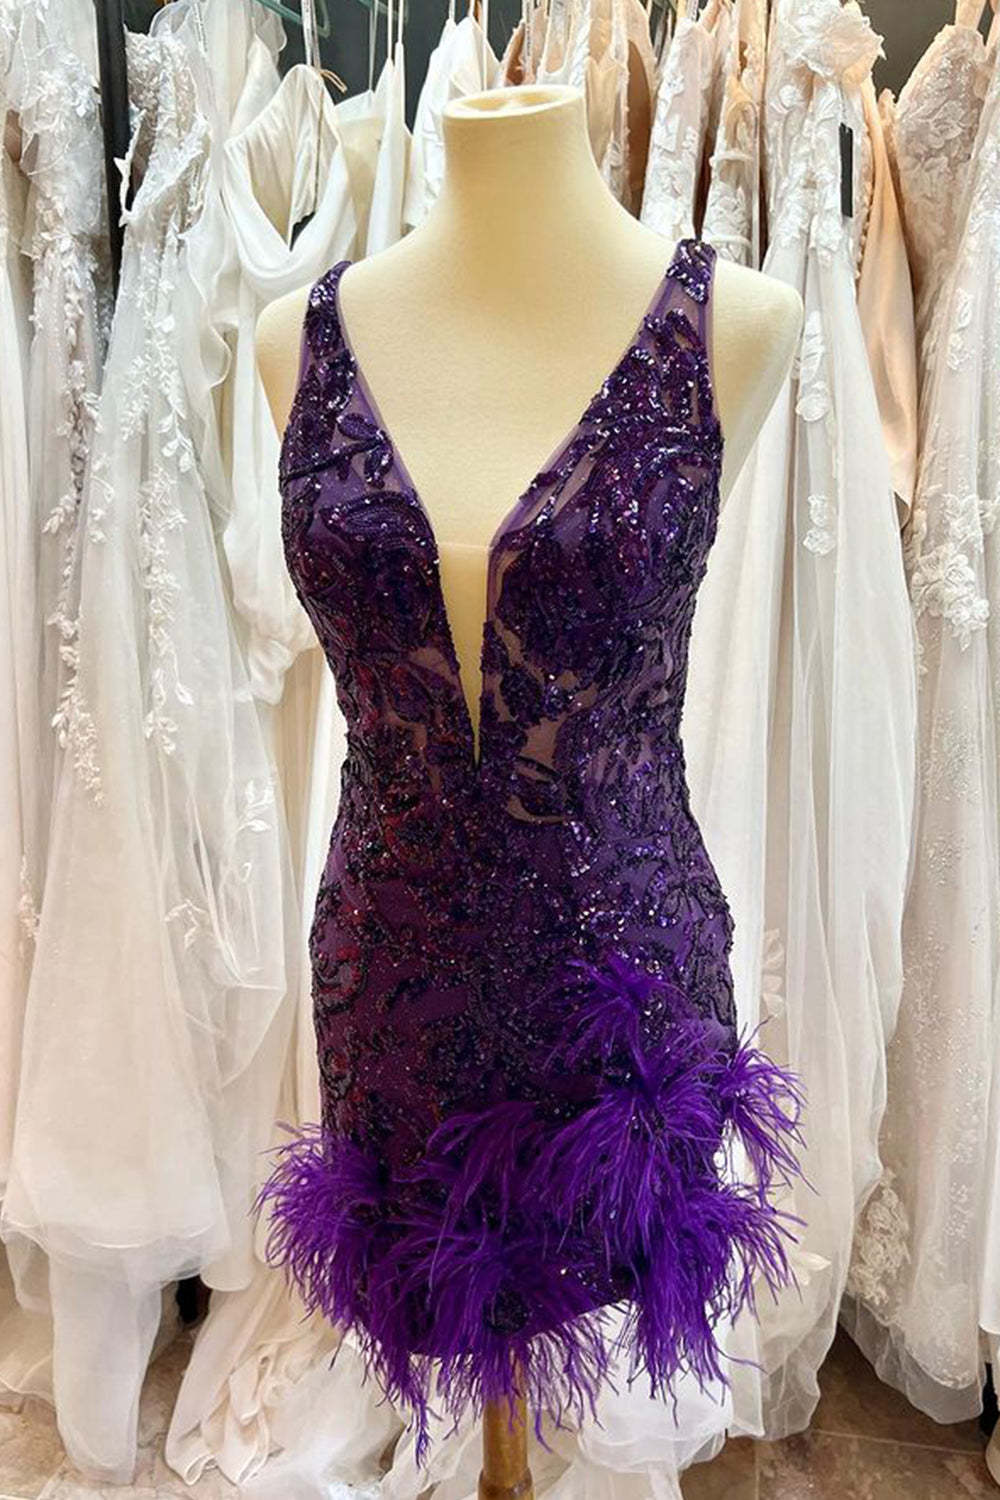 Sparkly Sheath Deep V Neck Purple Short Homecoming Dress with Feather